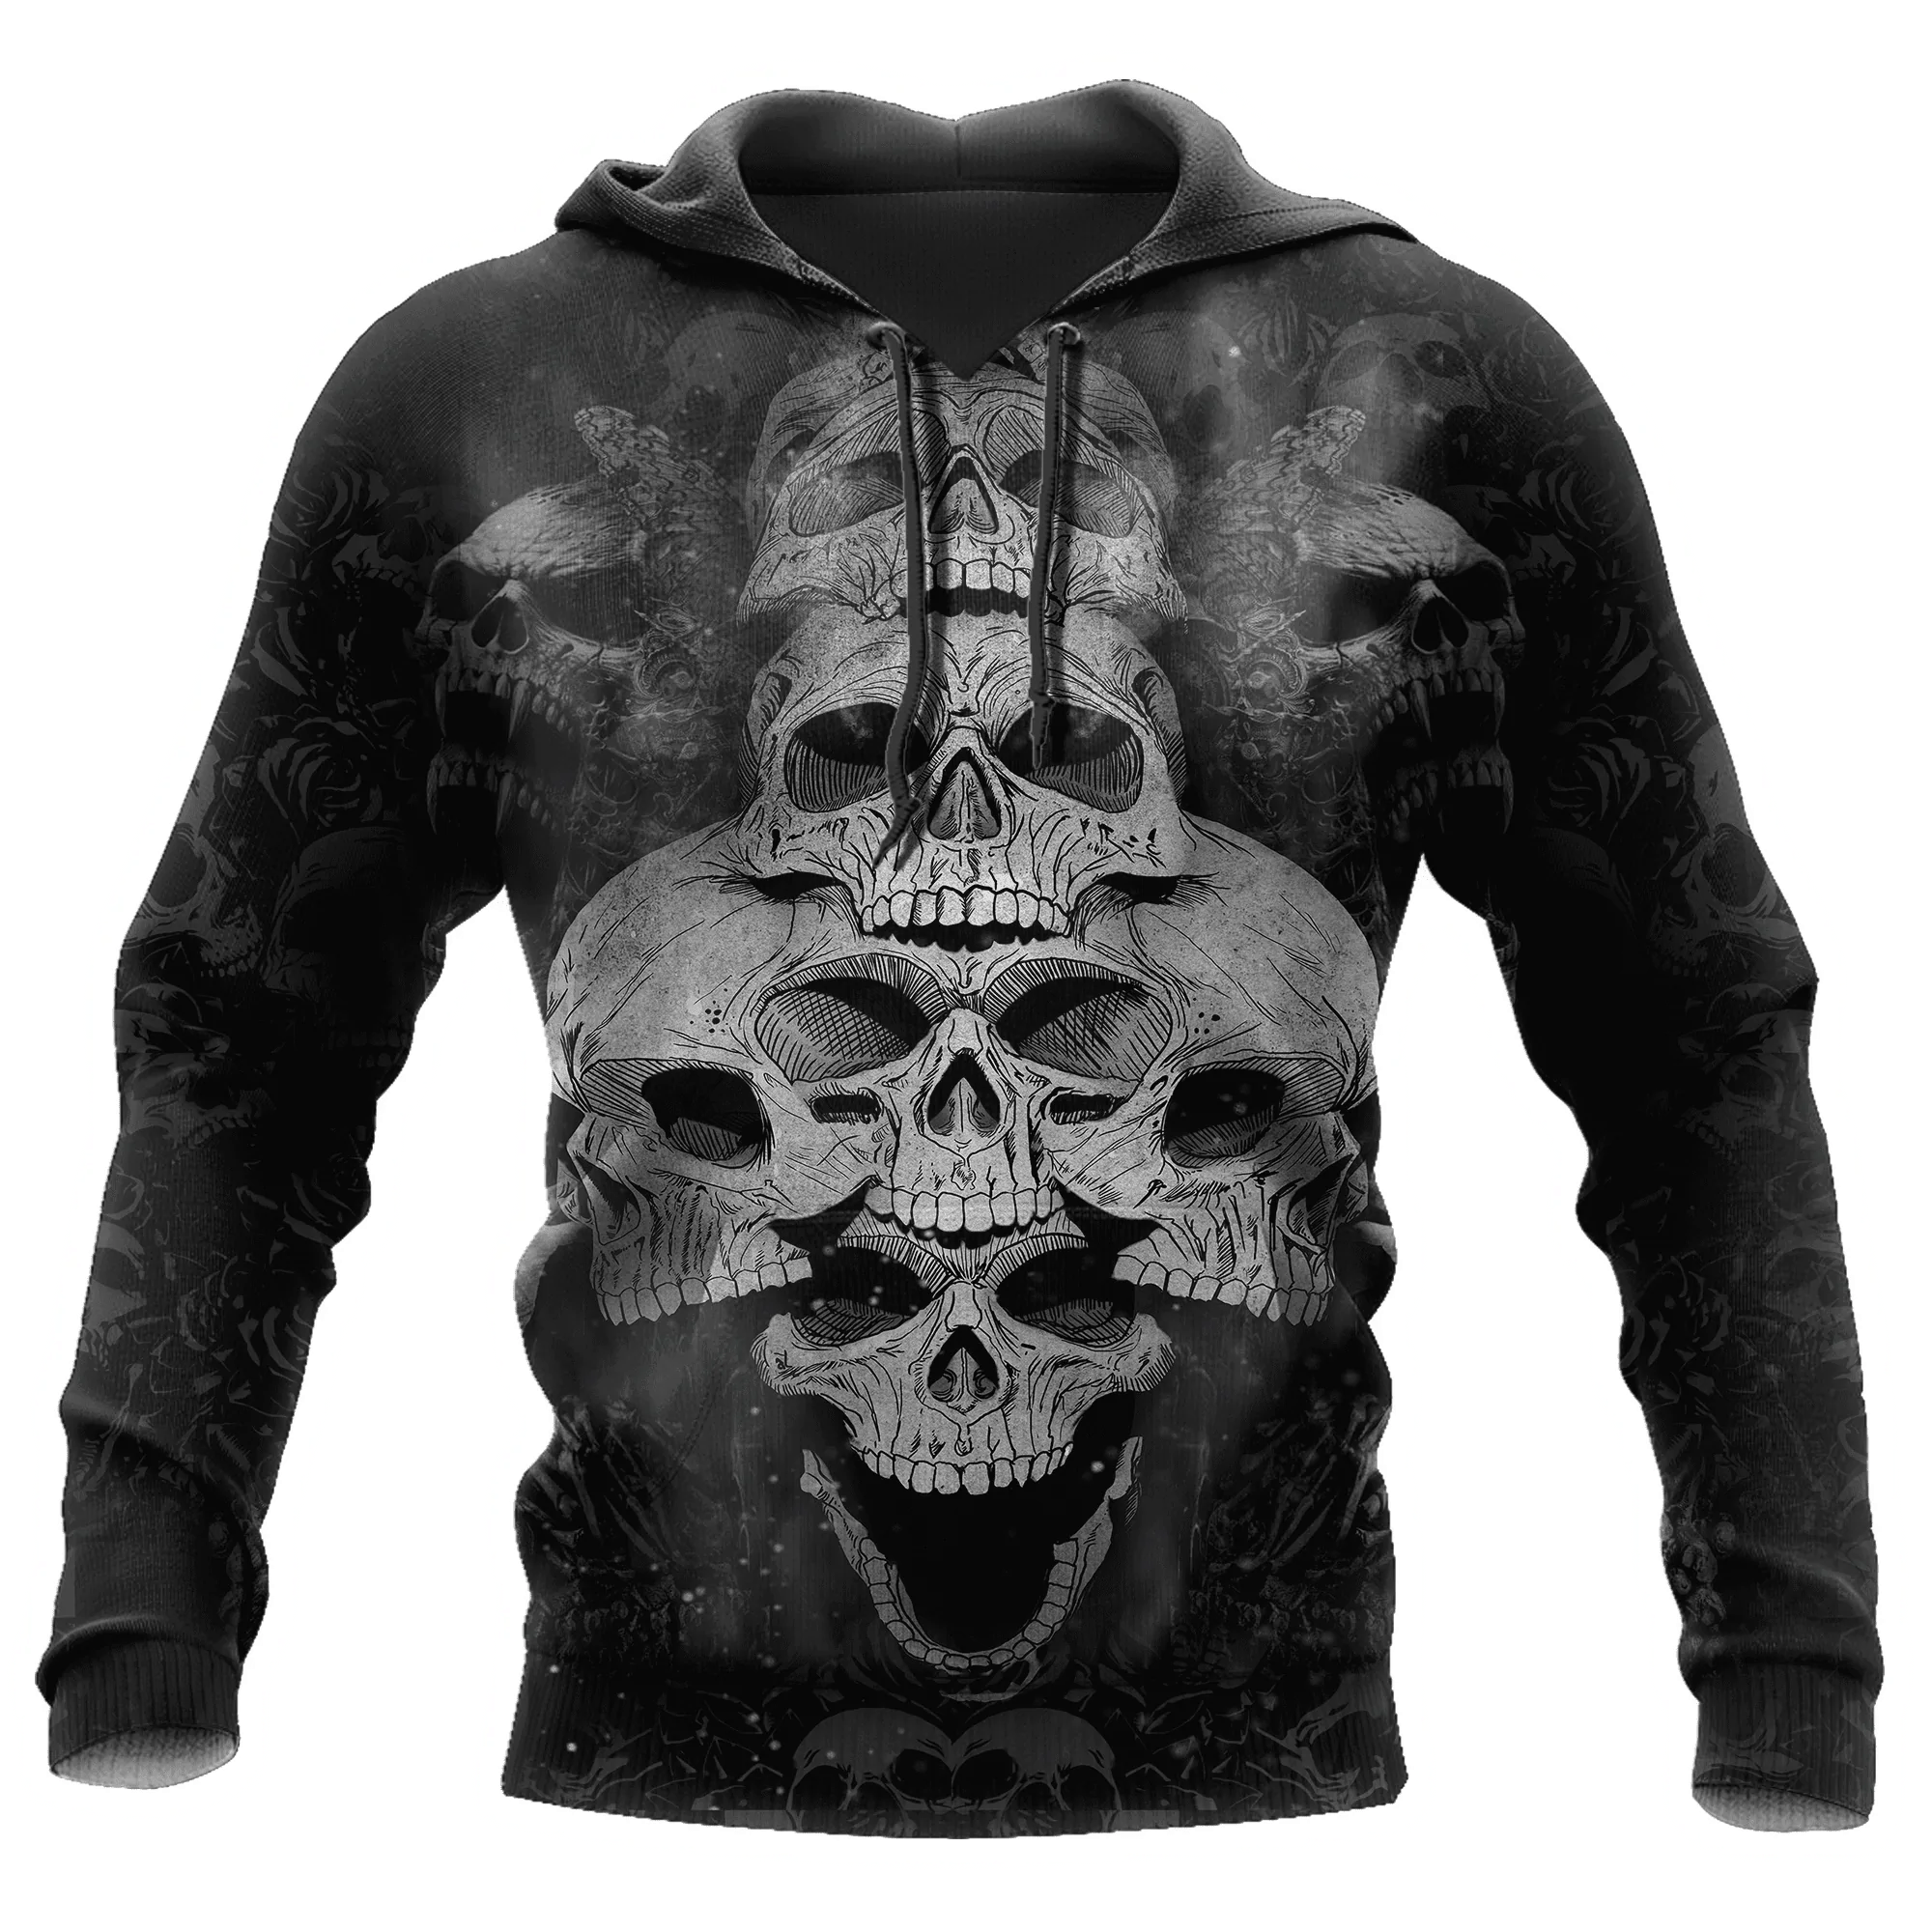 Thrilling Hoodie 3D/ All Over Print Hoodie With Skull/ Men Skull Hoodie/ Women Skull Hoodies